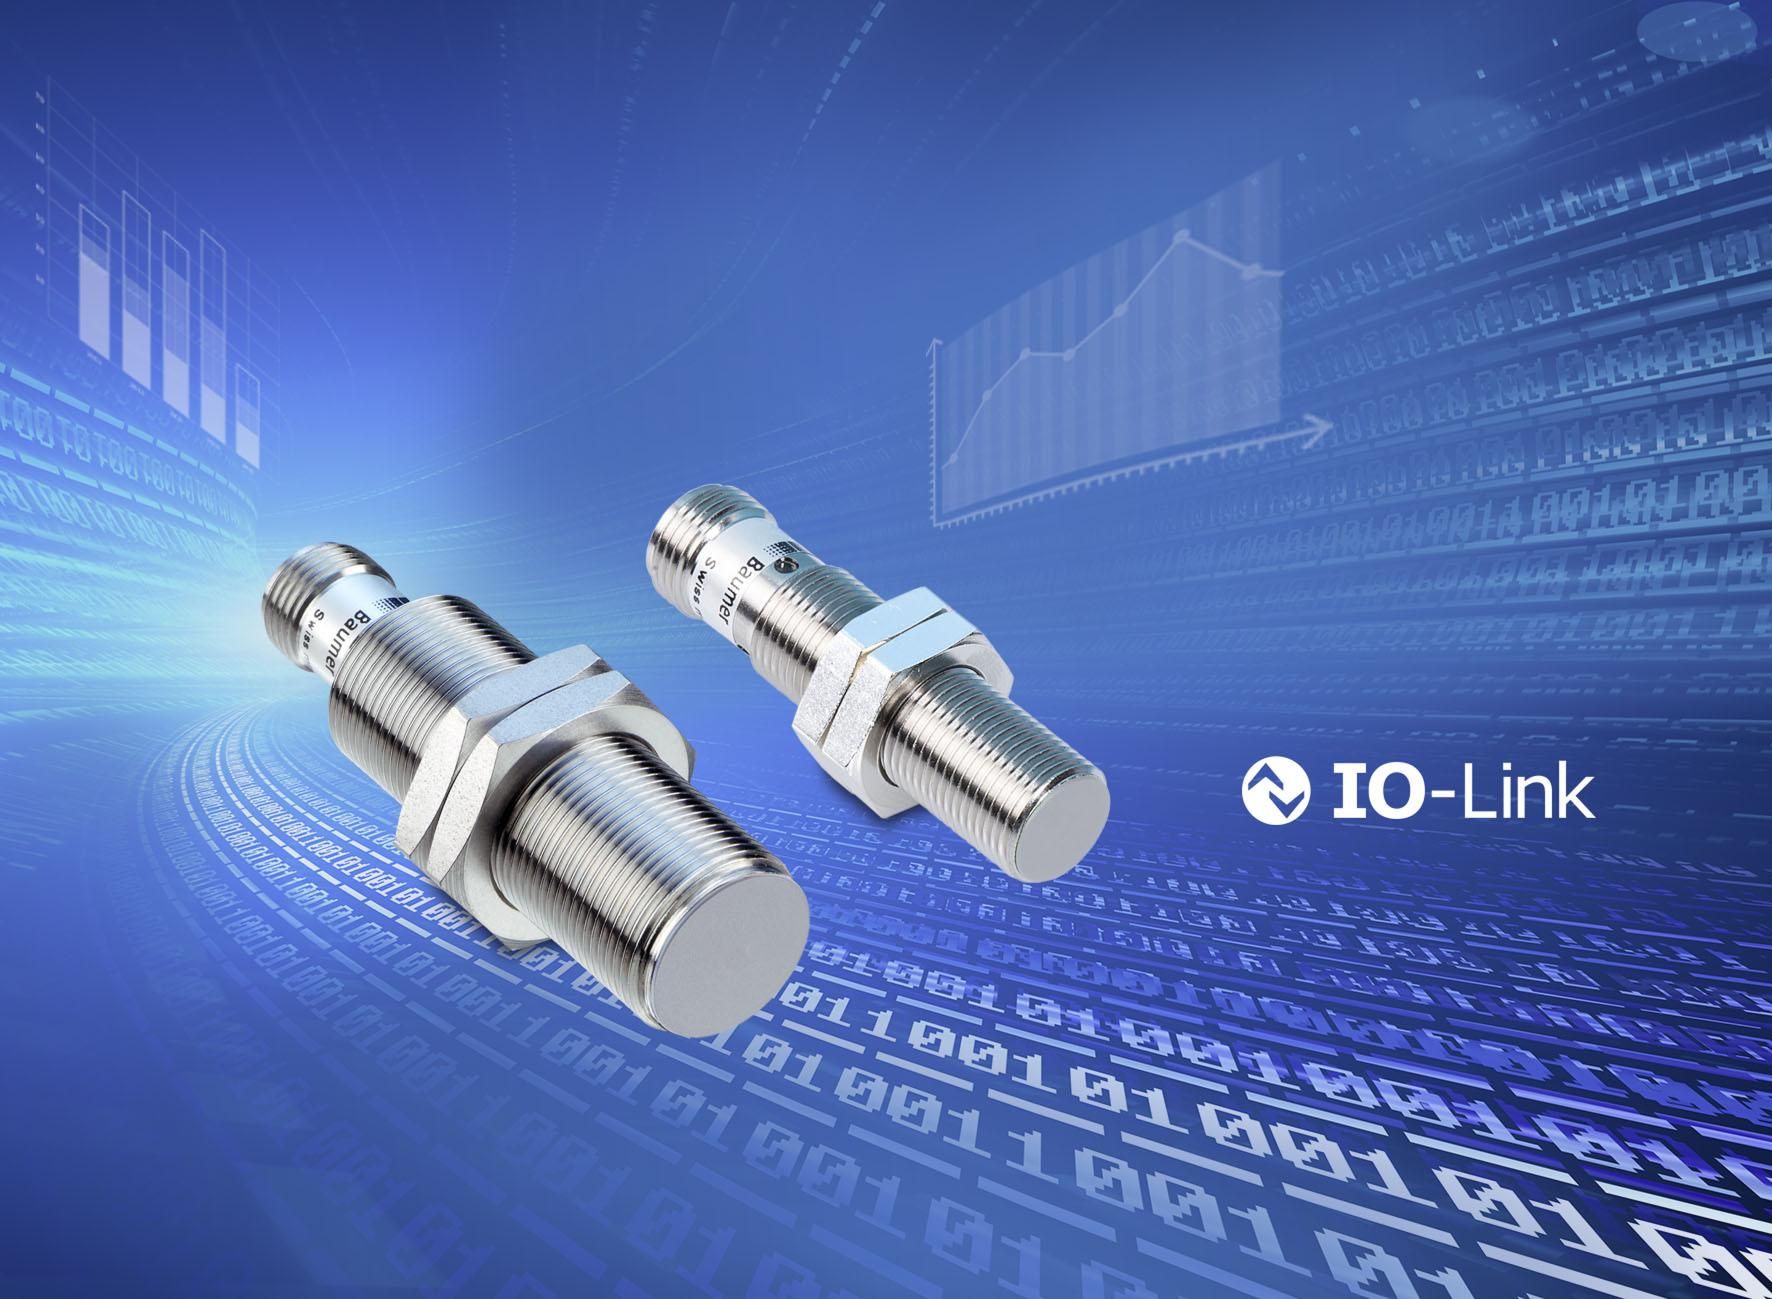 Leaving nothing to chance â€“ inductive IO-link sensors provide comprehensive diagnostic data for the greatest process safety